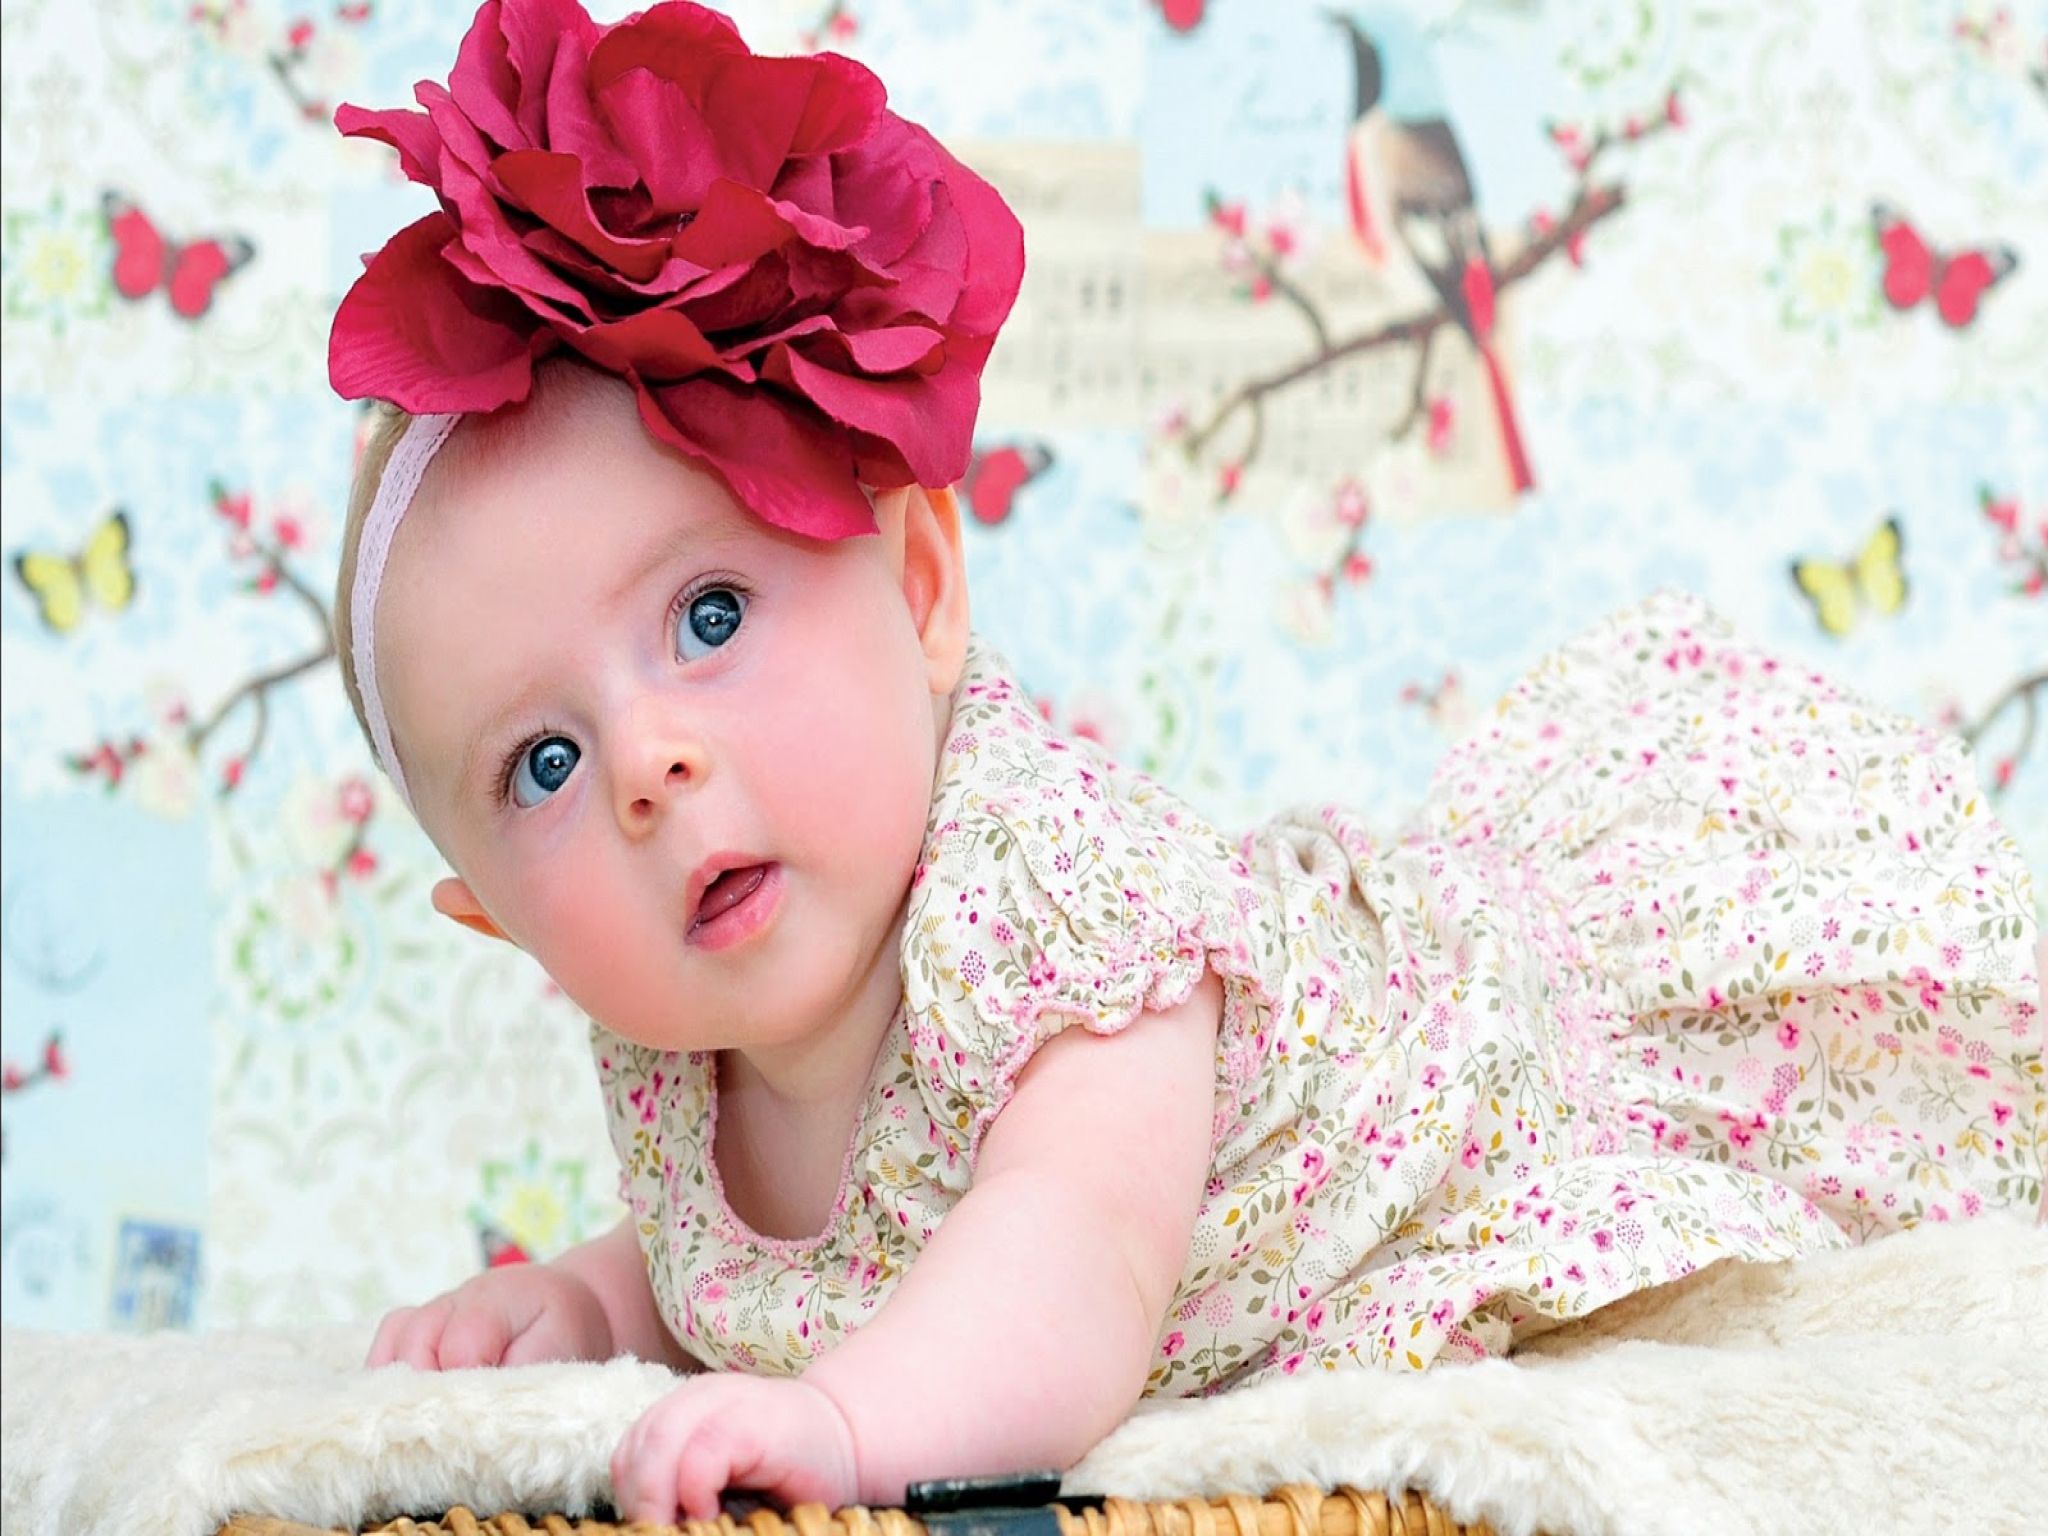 Cute baby picture HD wallpaper free download 3D